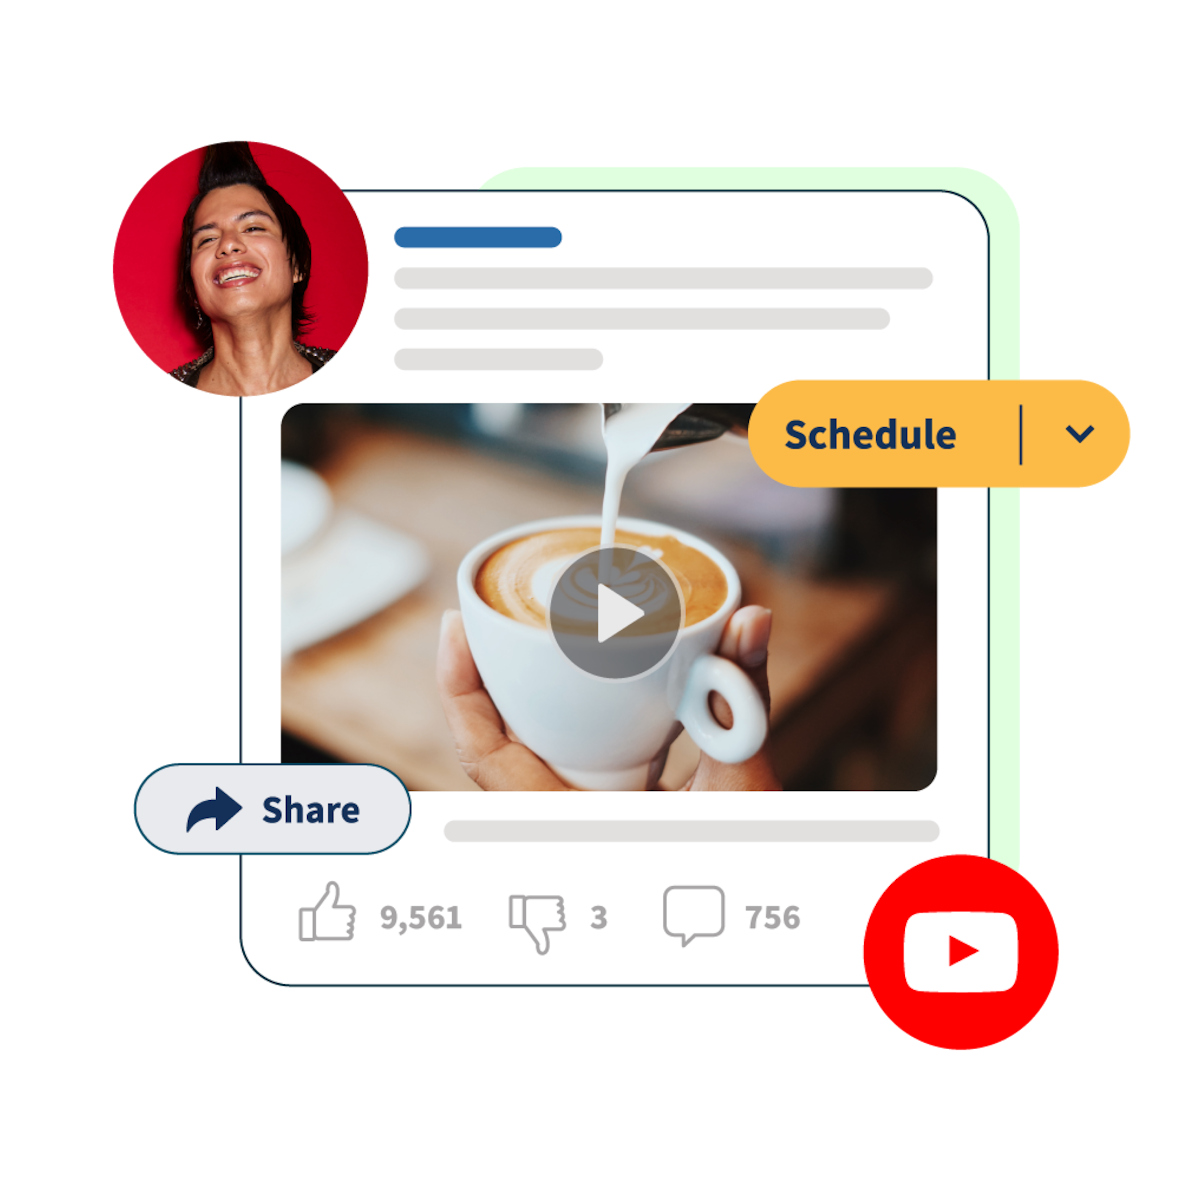 Youtube post of coffee pouring with "schedule" and "share pop-ups